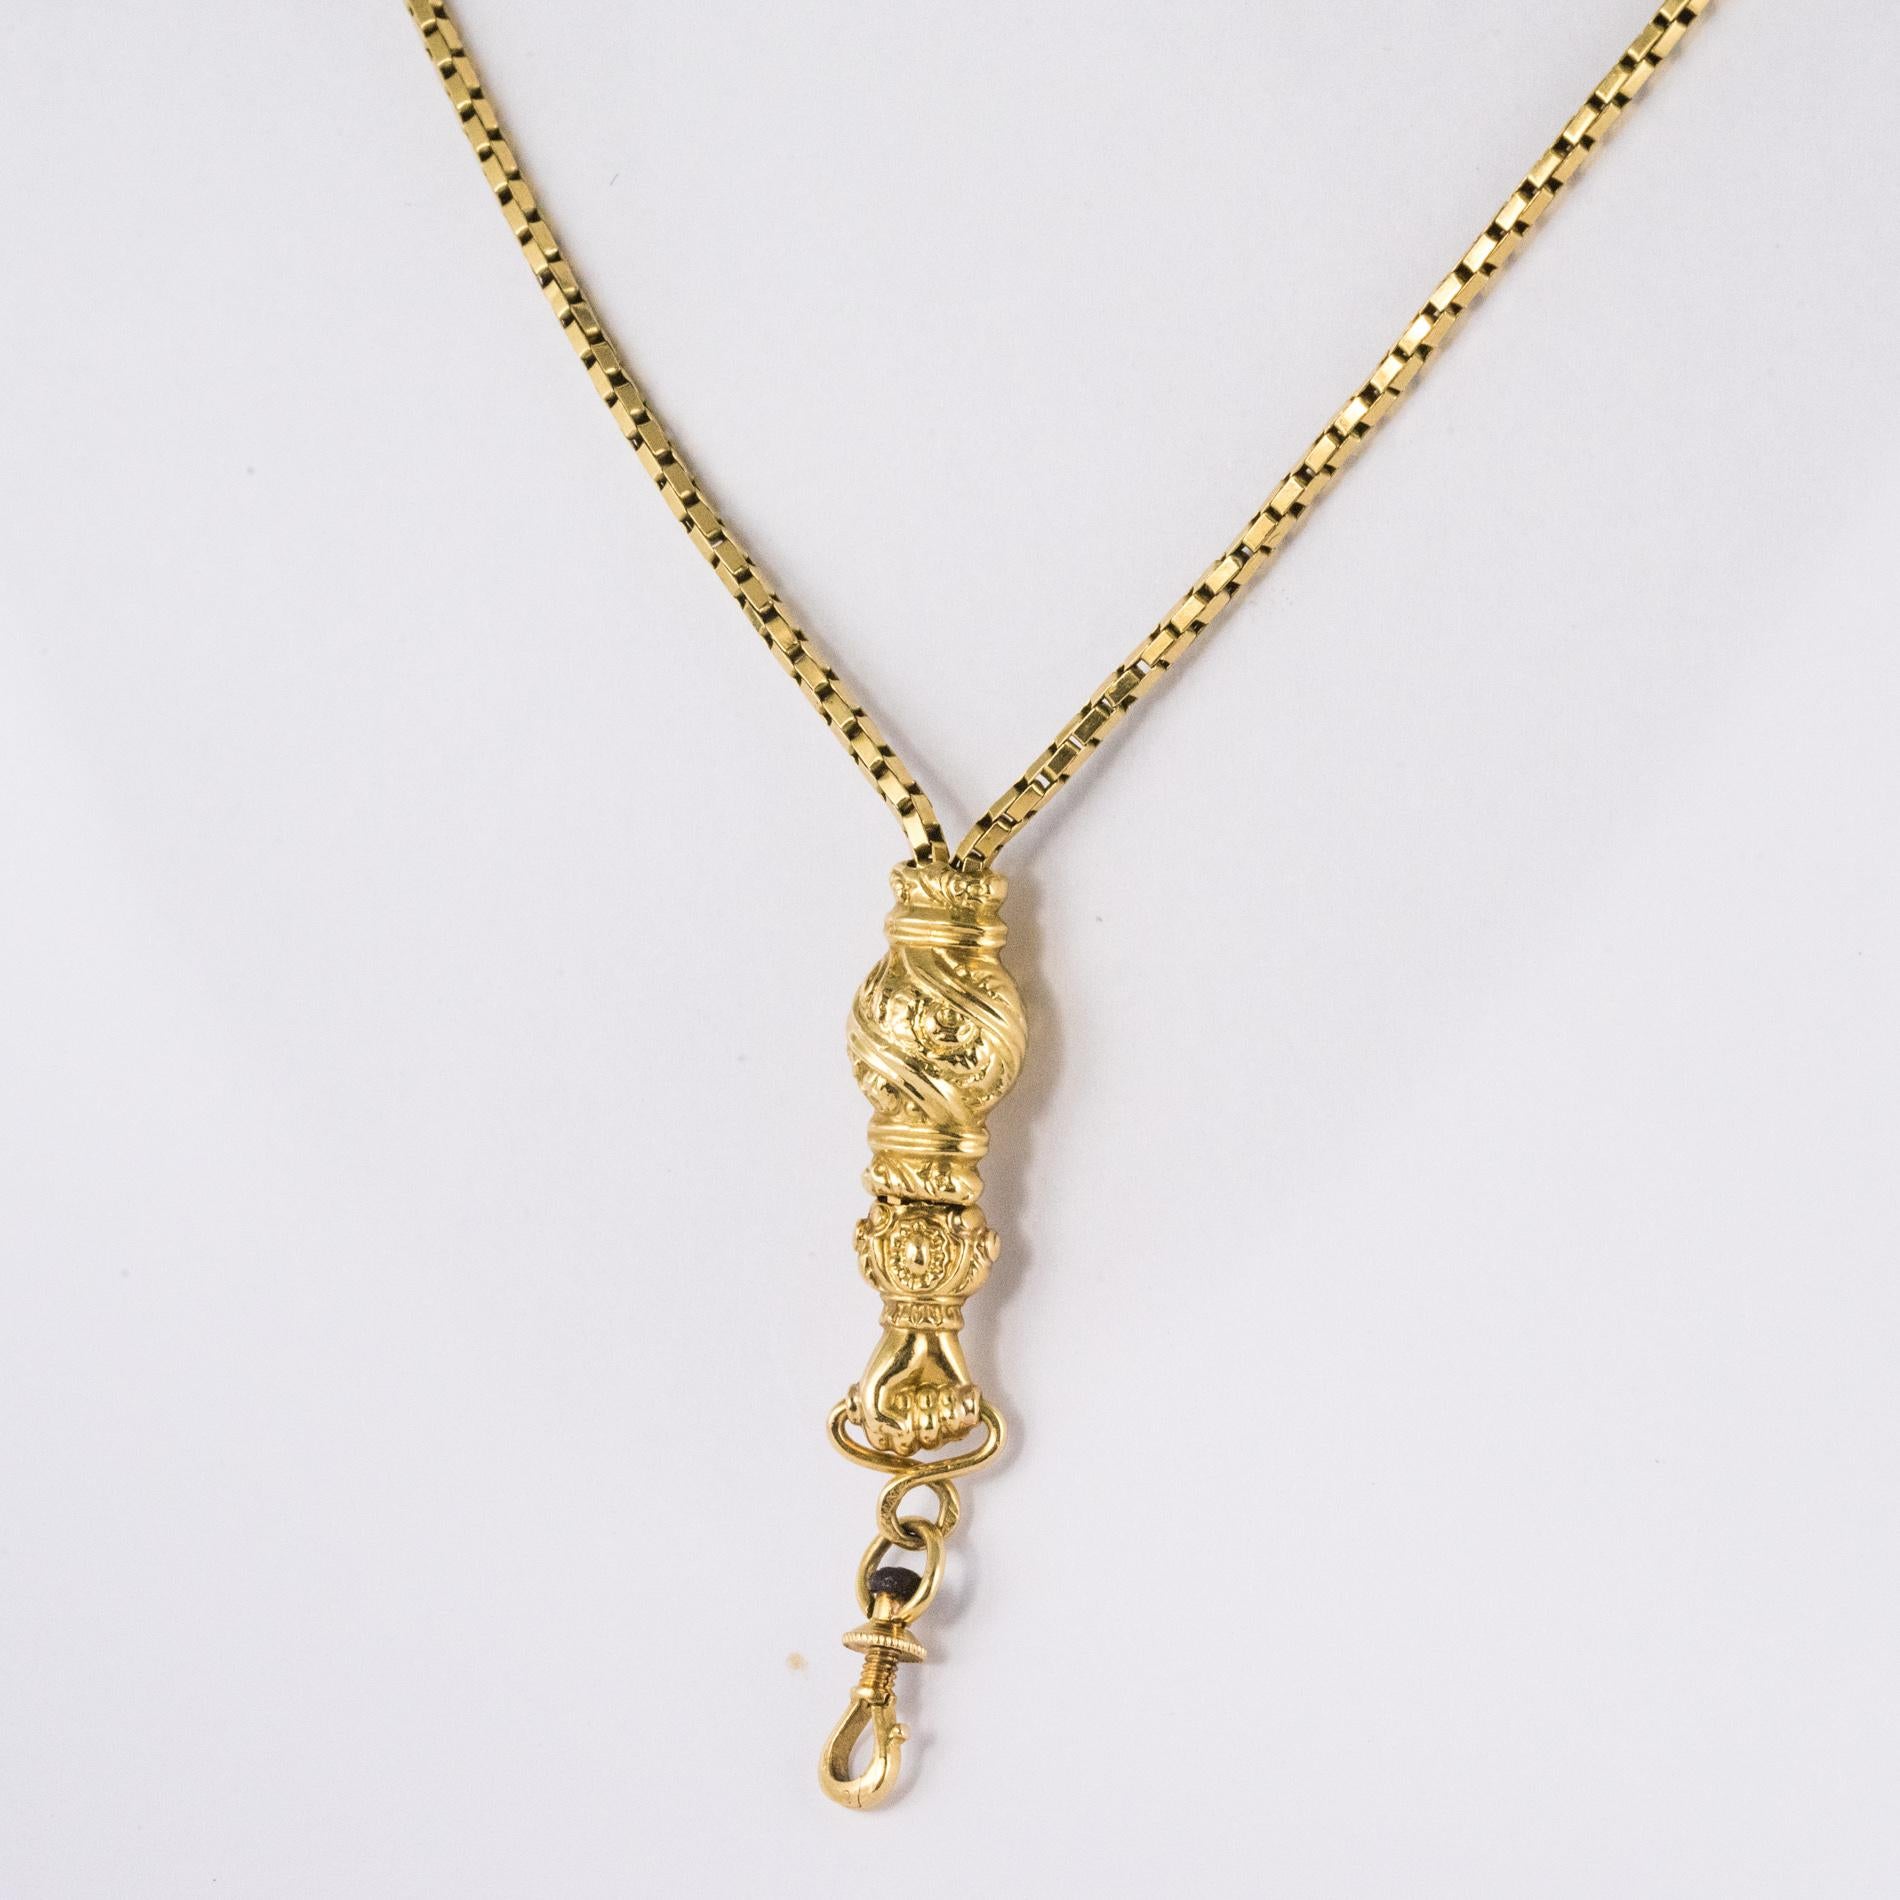 Necklace in 18 karat yellow gold, eagle's head hallmark.
Probably antique watch chain, this gold necklace is formed of a rectangle link on which circulates a slide, chiseled with foliage and which ends in a pattern chiseled in gloved hand, which